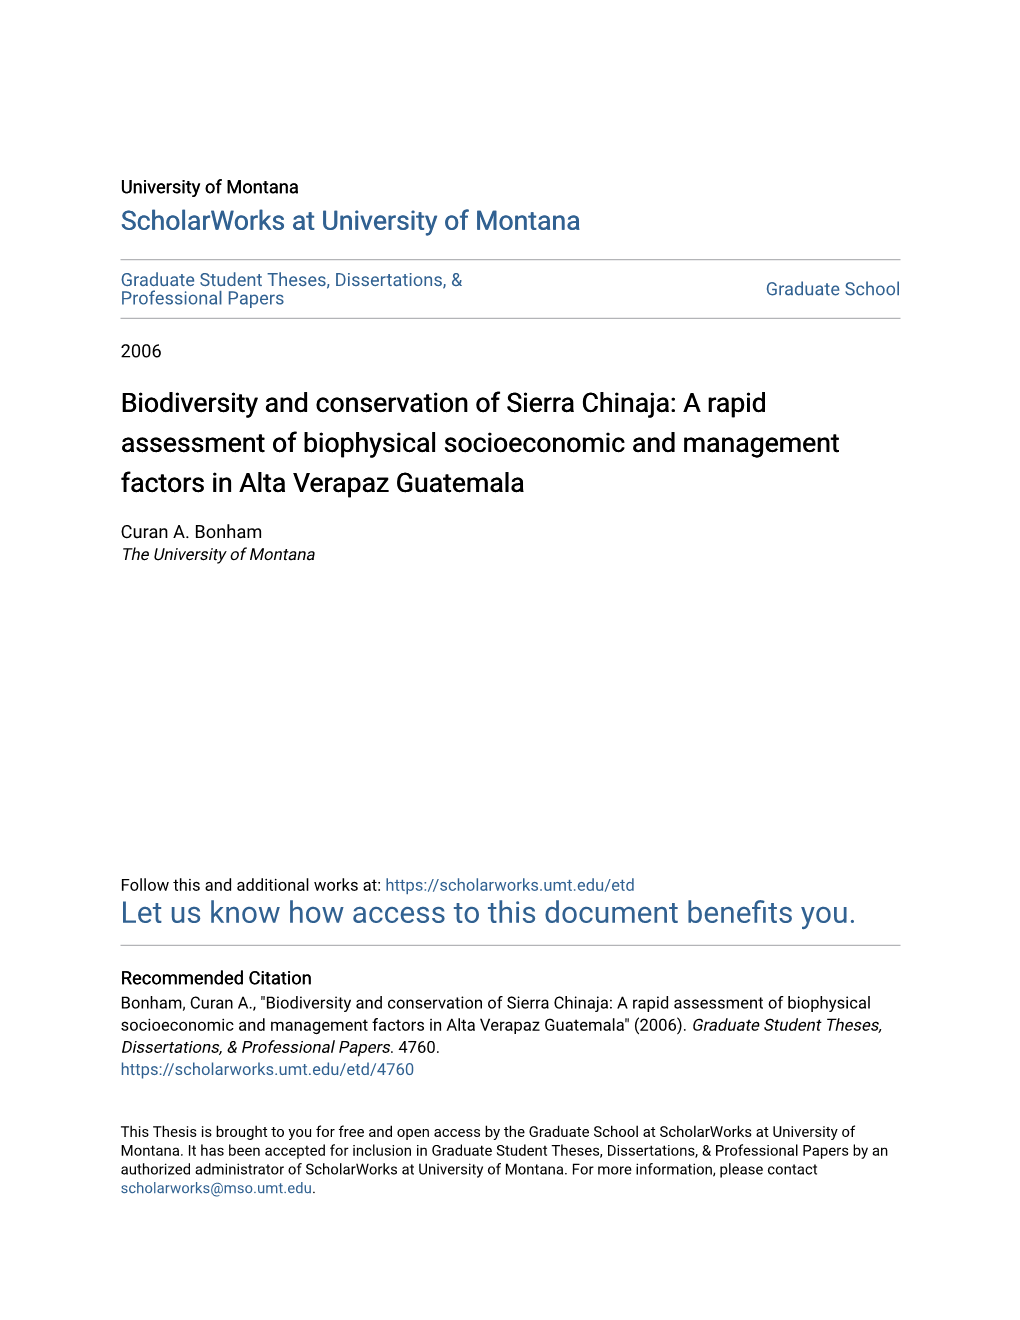 Biodiversity and Conservation of Sierra Chinaja: a Rapid Assessment of Biophysical Socioeconomic and Management Factors in Alta Verapaz Guatemala